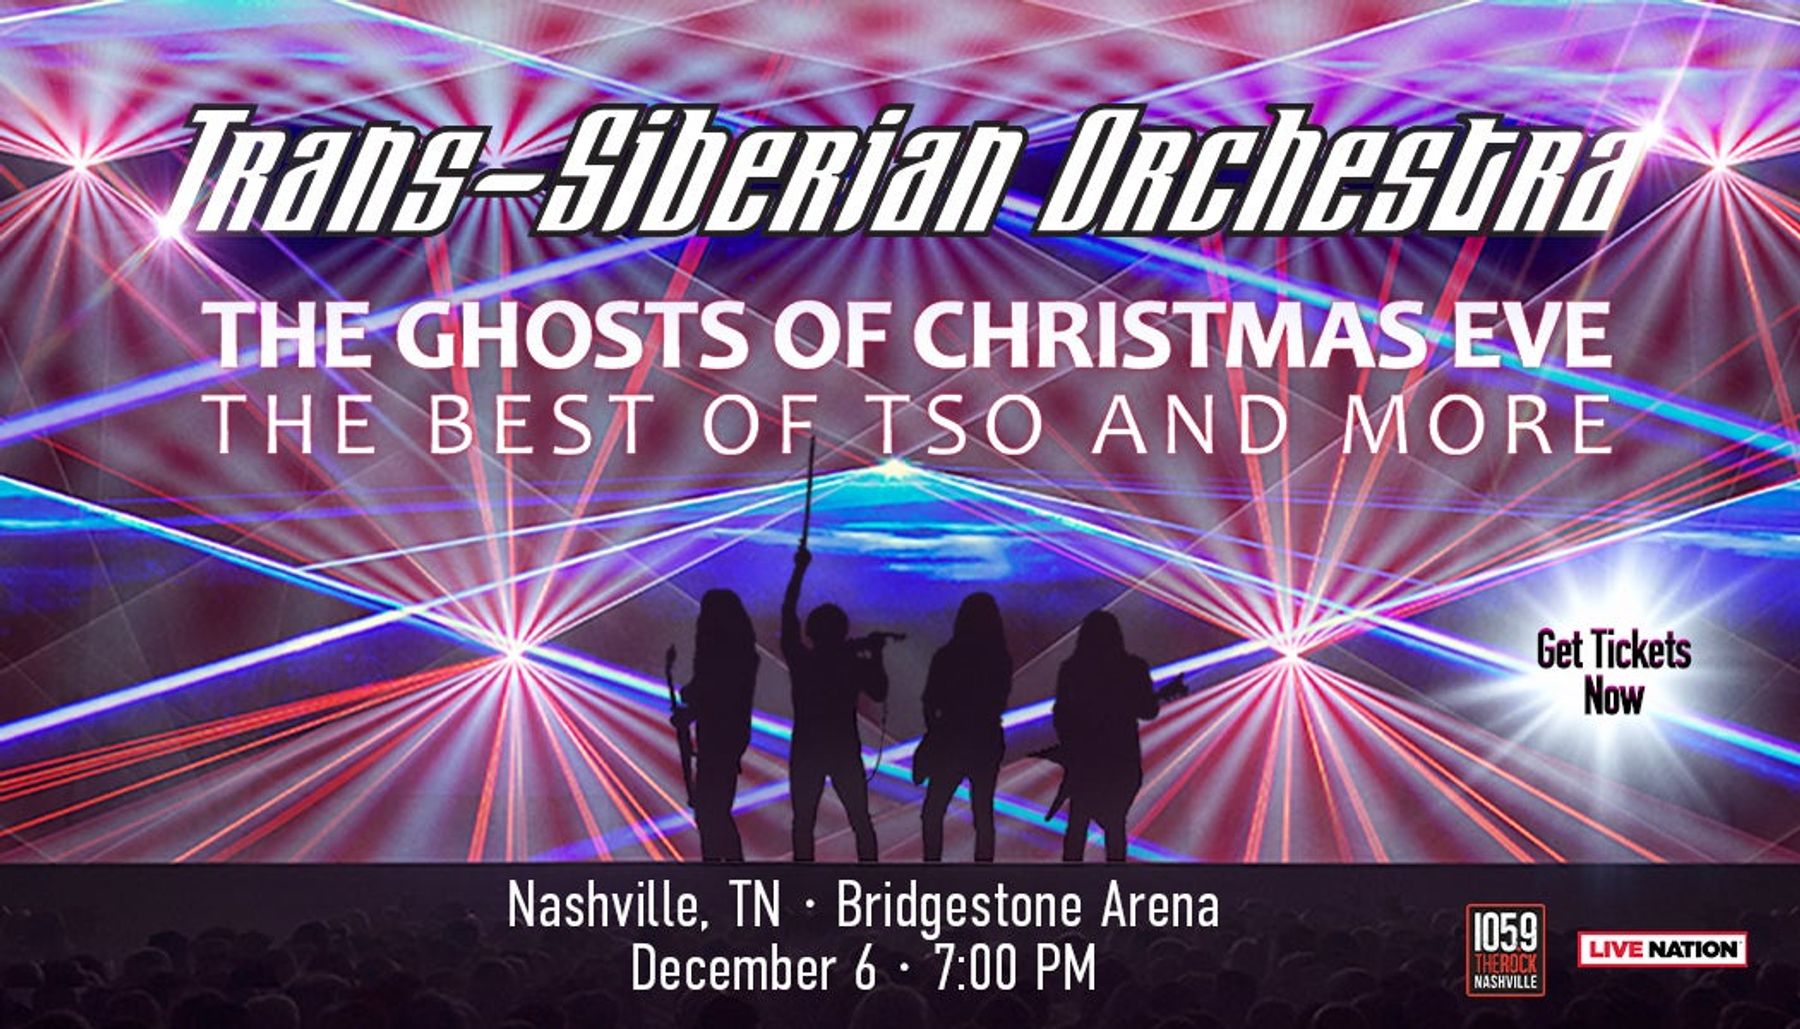 TransSiberian Orchestra The Ghosts of Christmas Eve Downtown Nashville